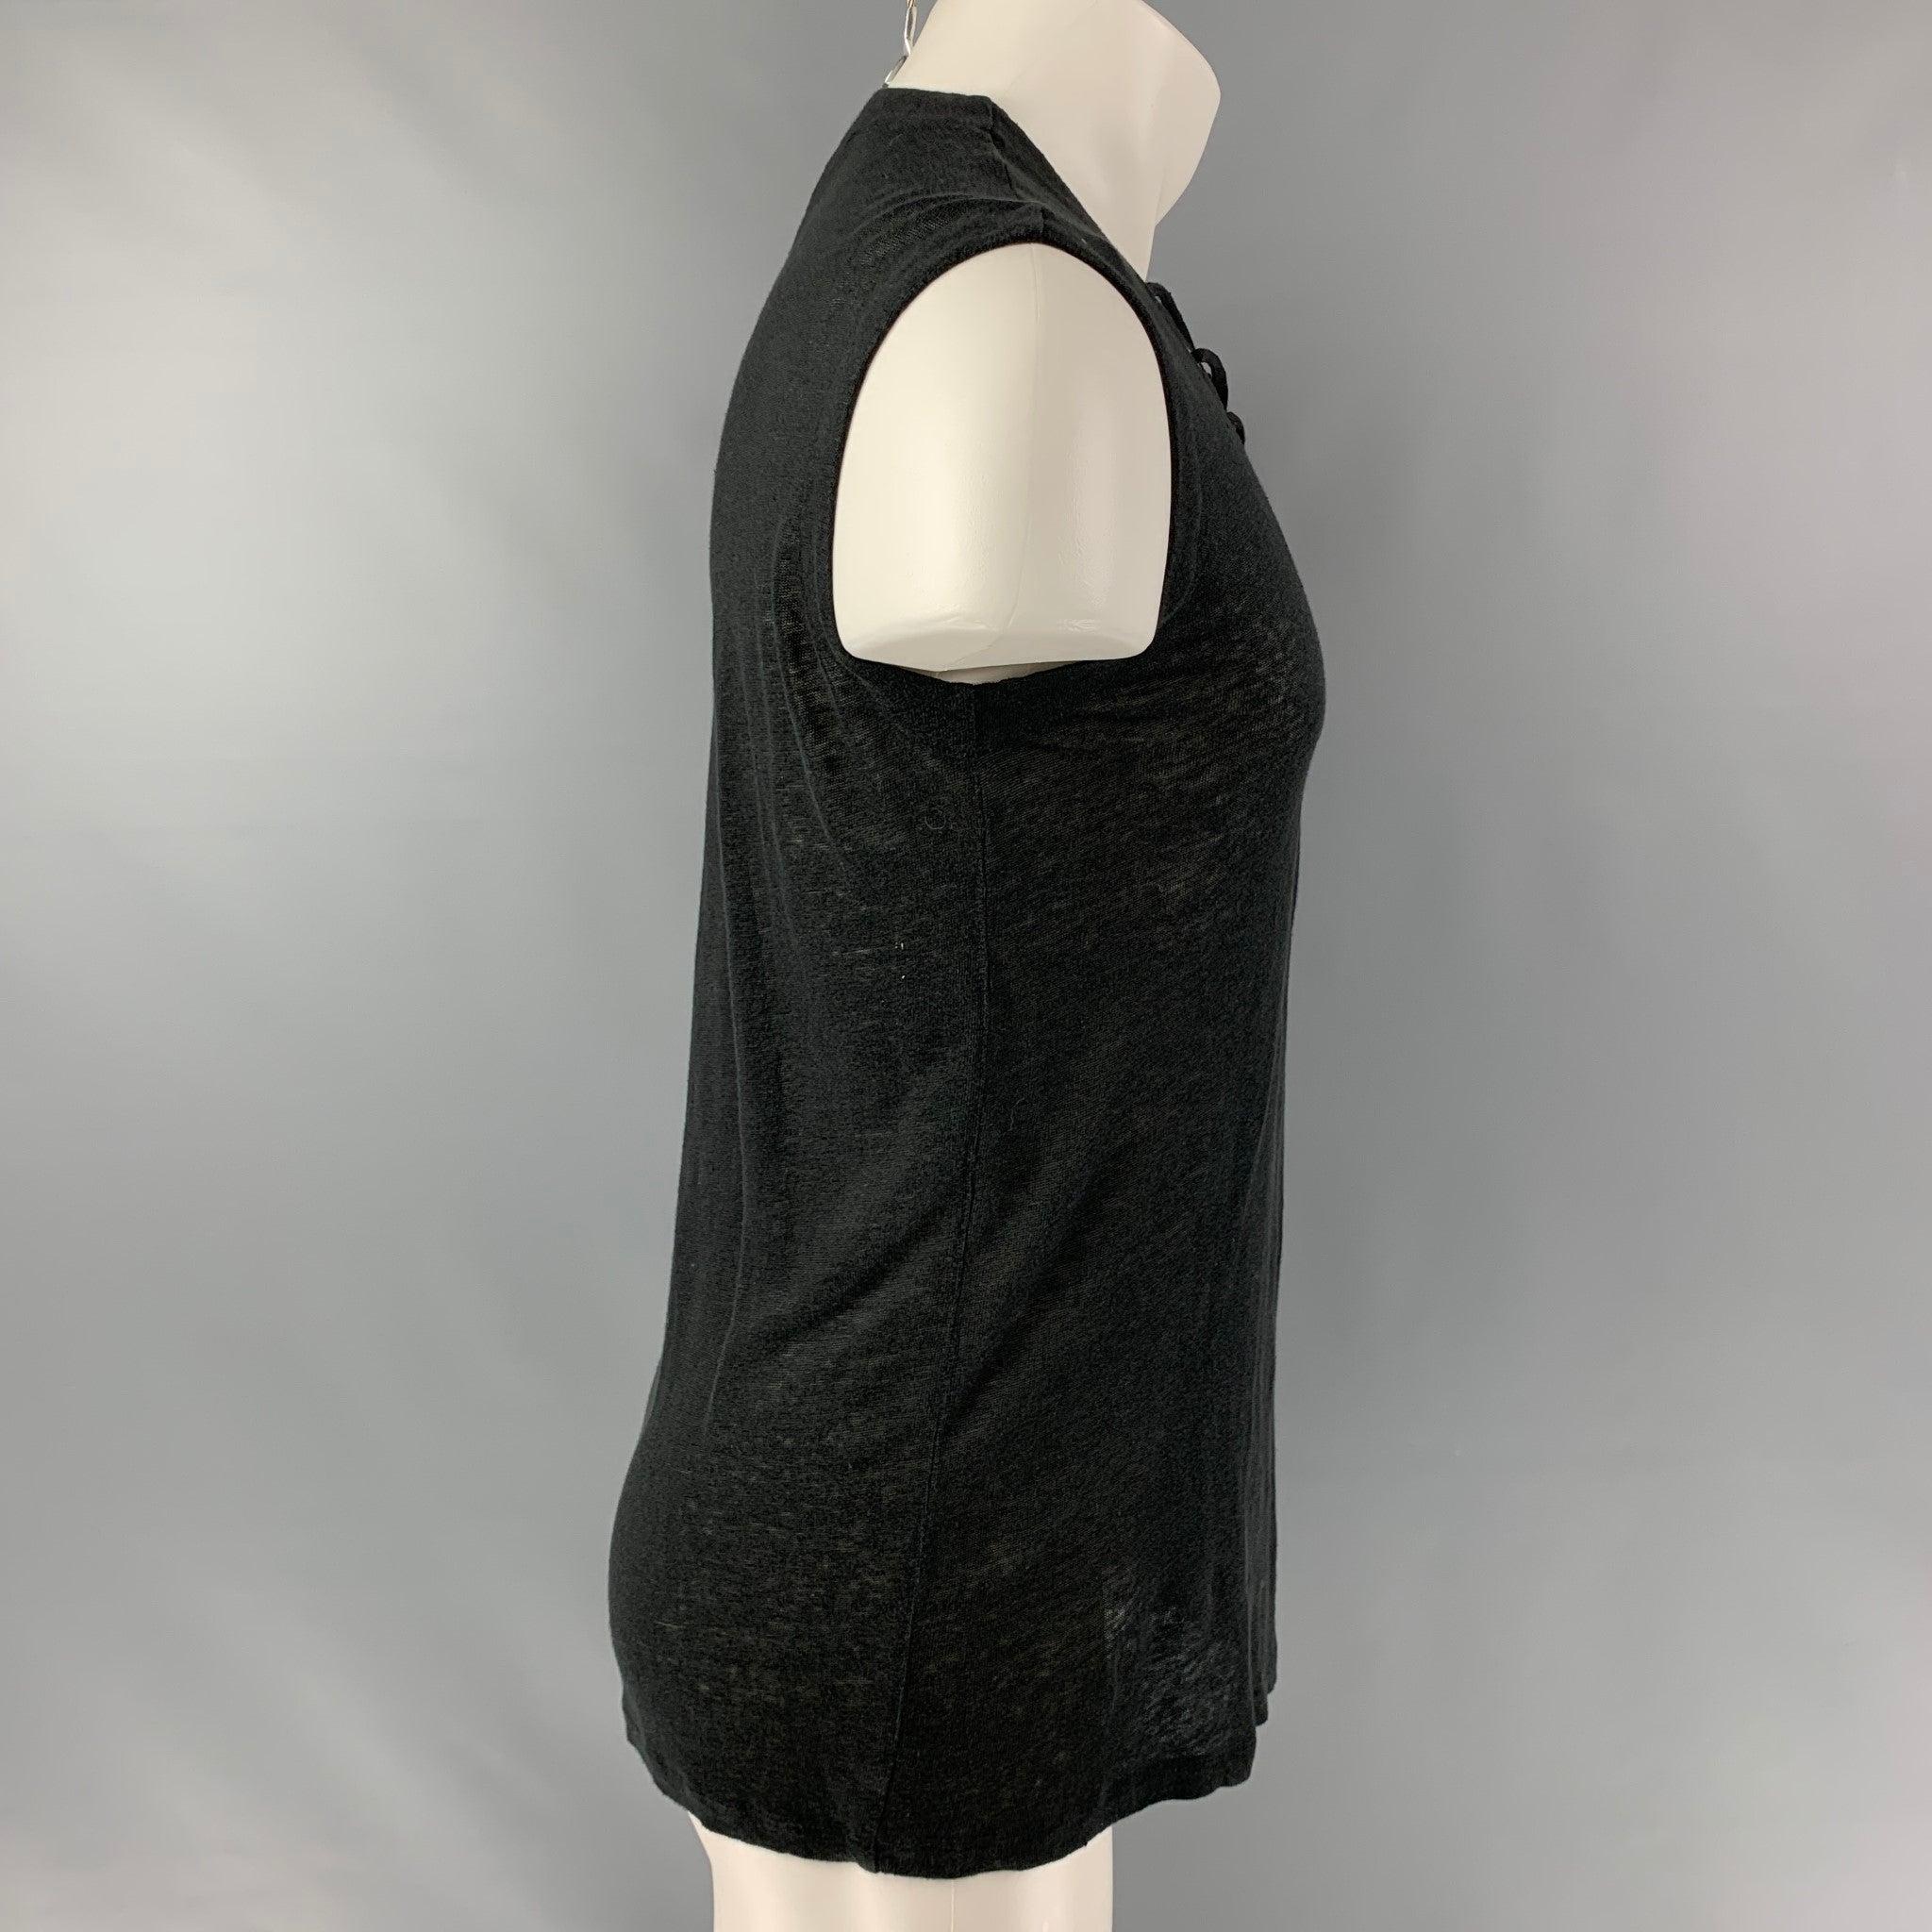 IRO JEANS Tissa tank top comes in a black partially see through linen jersey featuring a see laced chest detail and crew-neck. Made in Portugal.Excellent Pre-Owned Condition.  

Marked:   S 

Measurements: 
 
Shoulder: 18 inches Chest: 46 inches